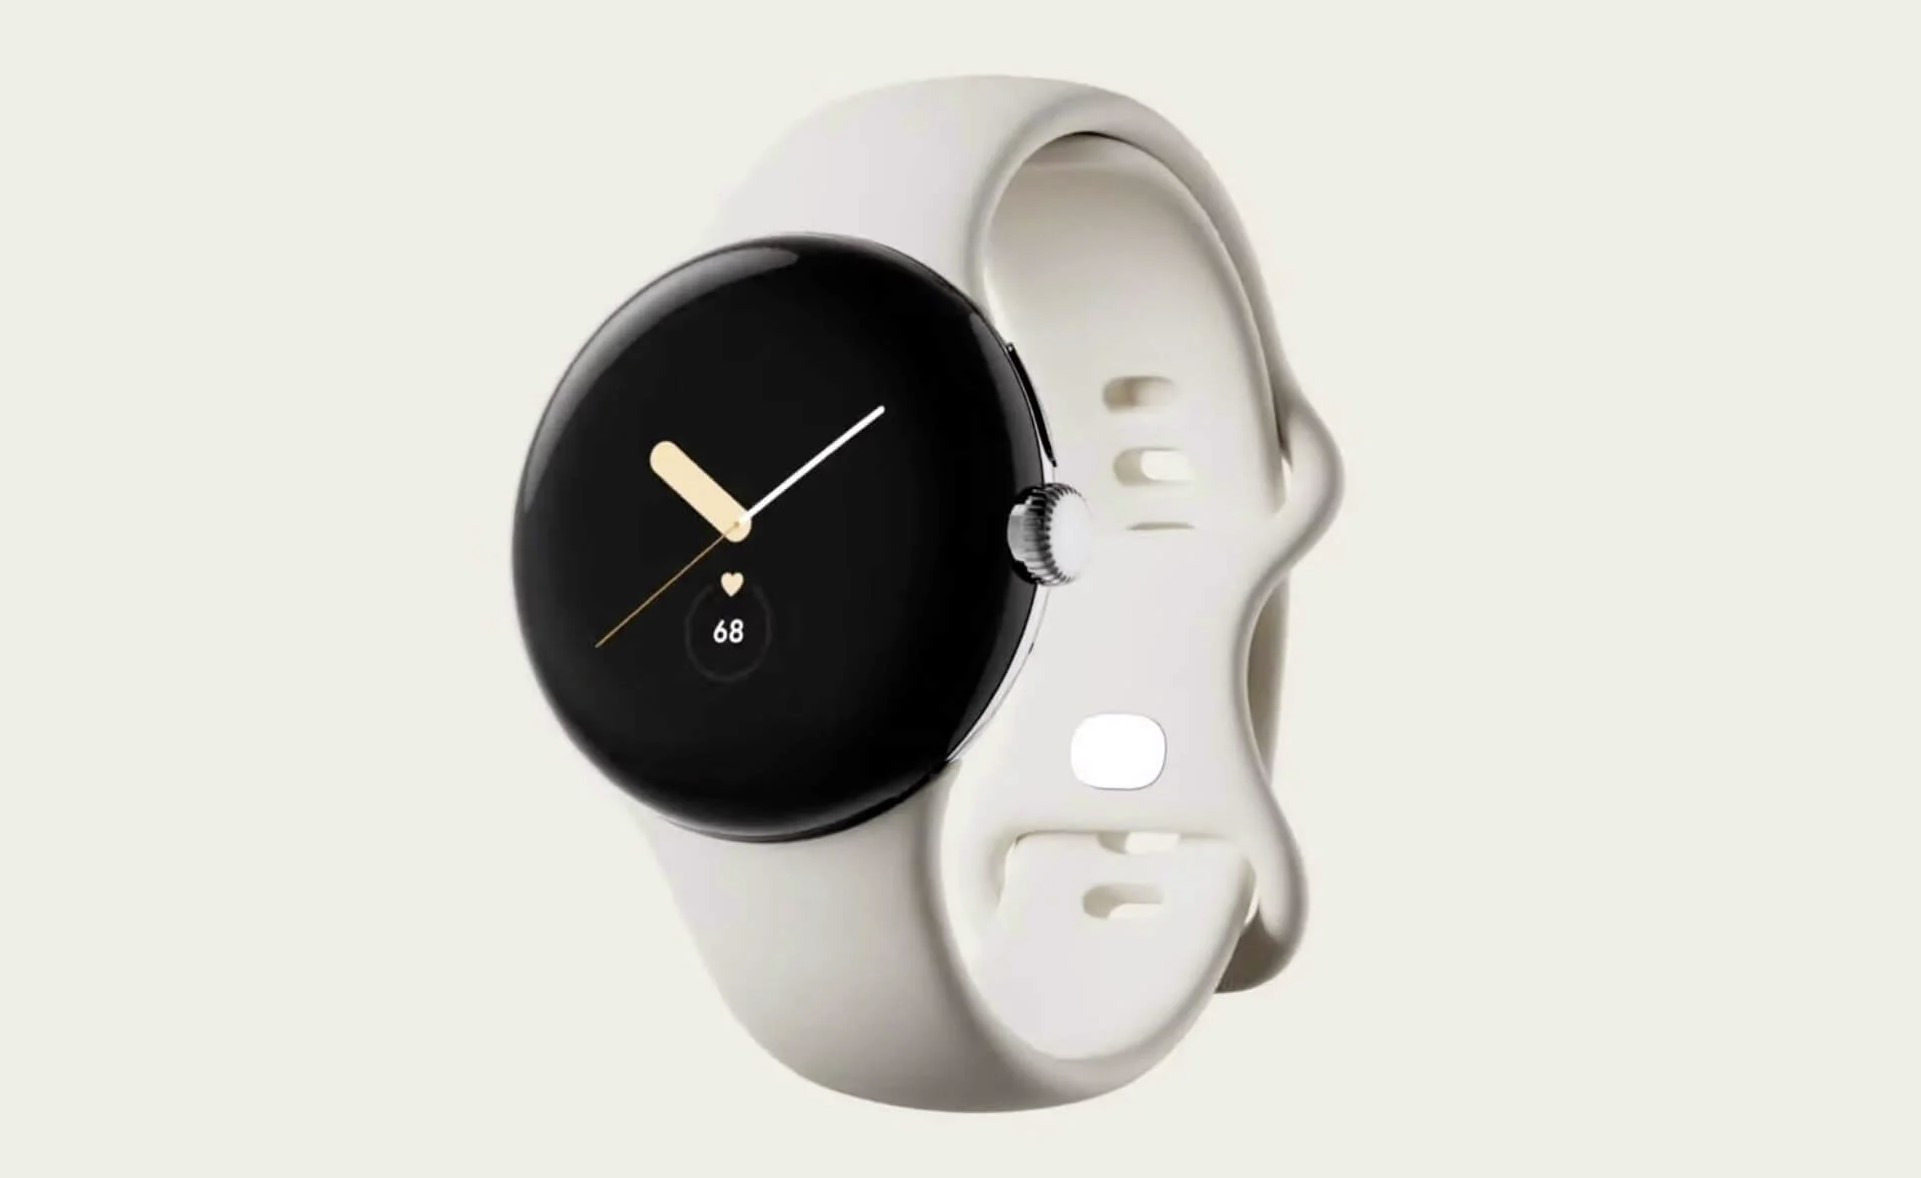 Google Pixel Watch will be made by Apple watch manufacturer and come with USB-C charging cable